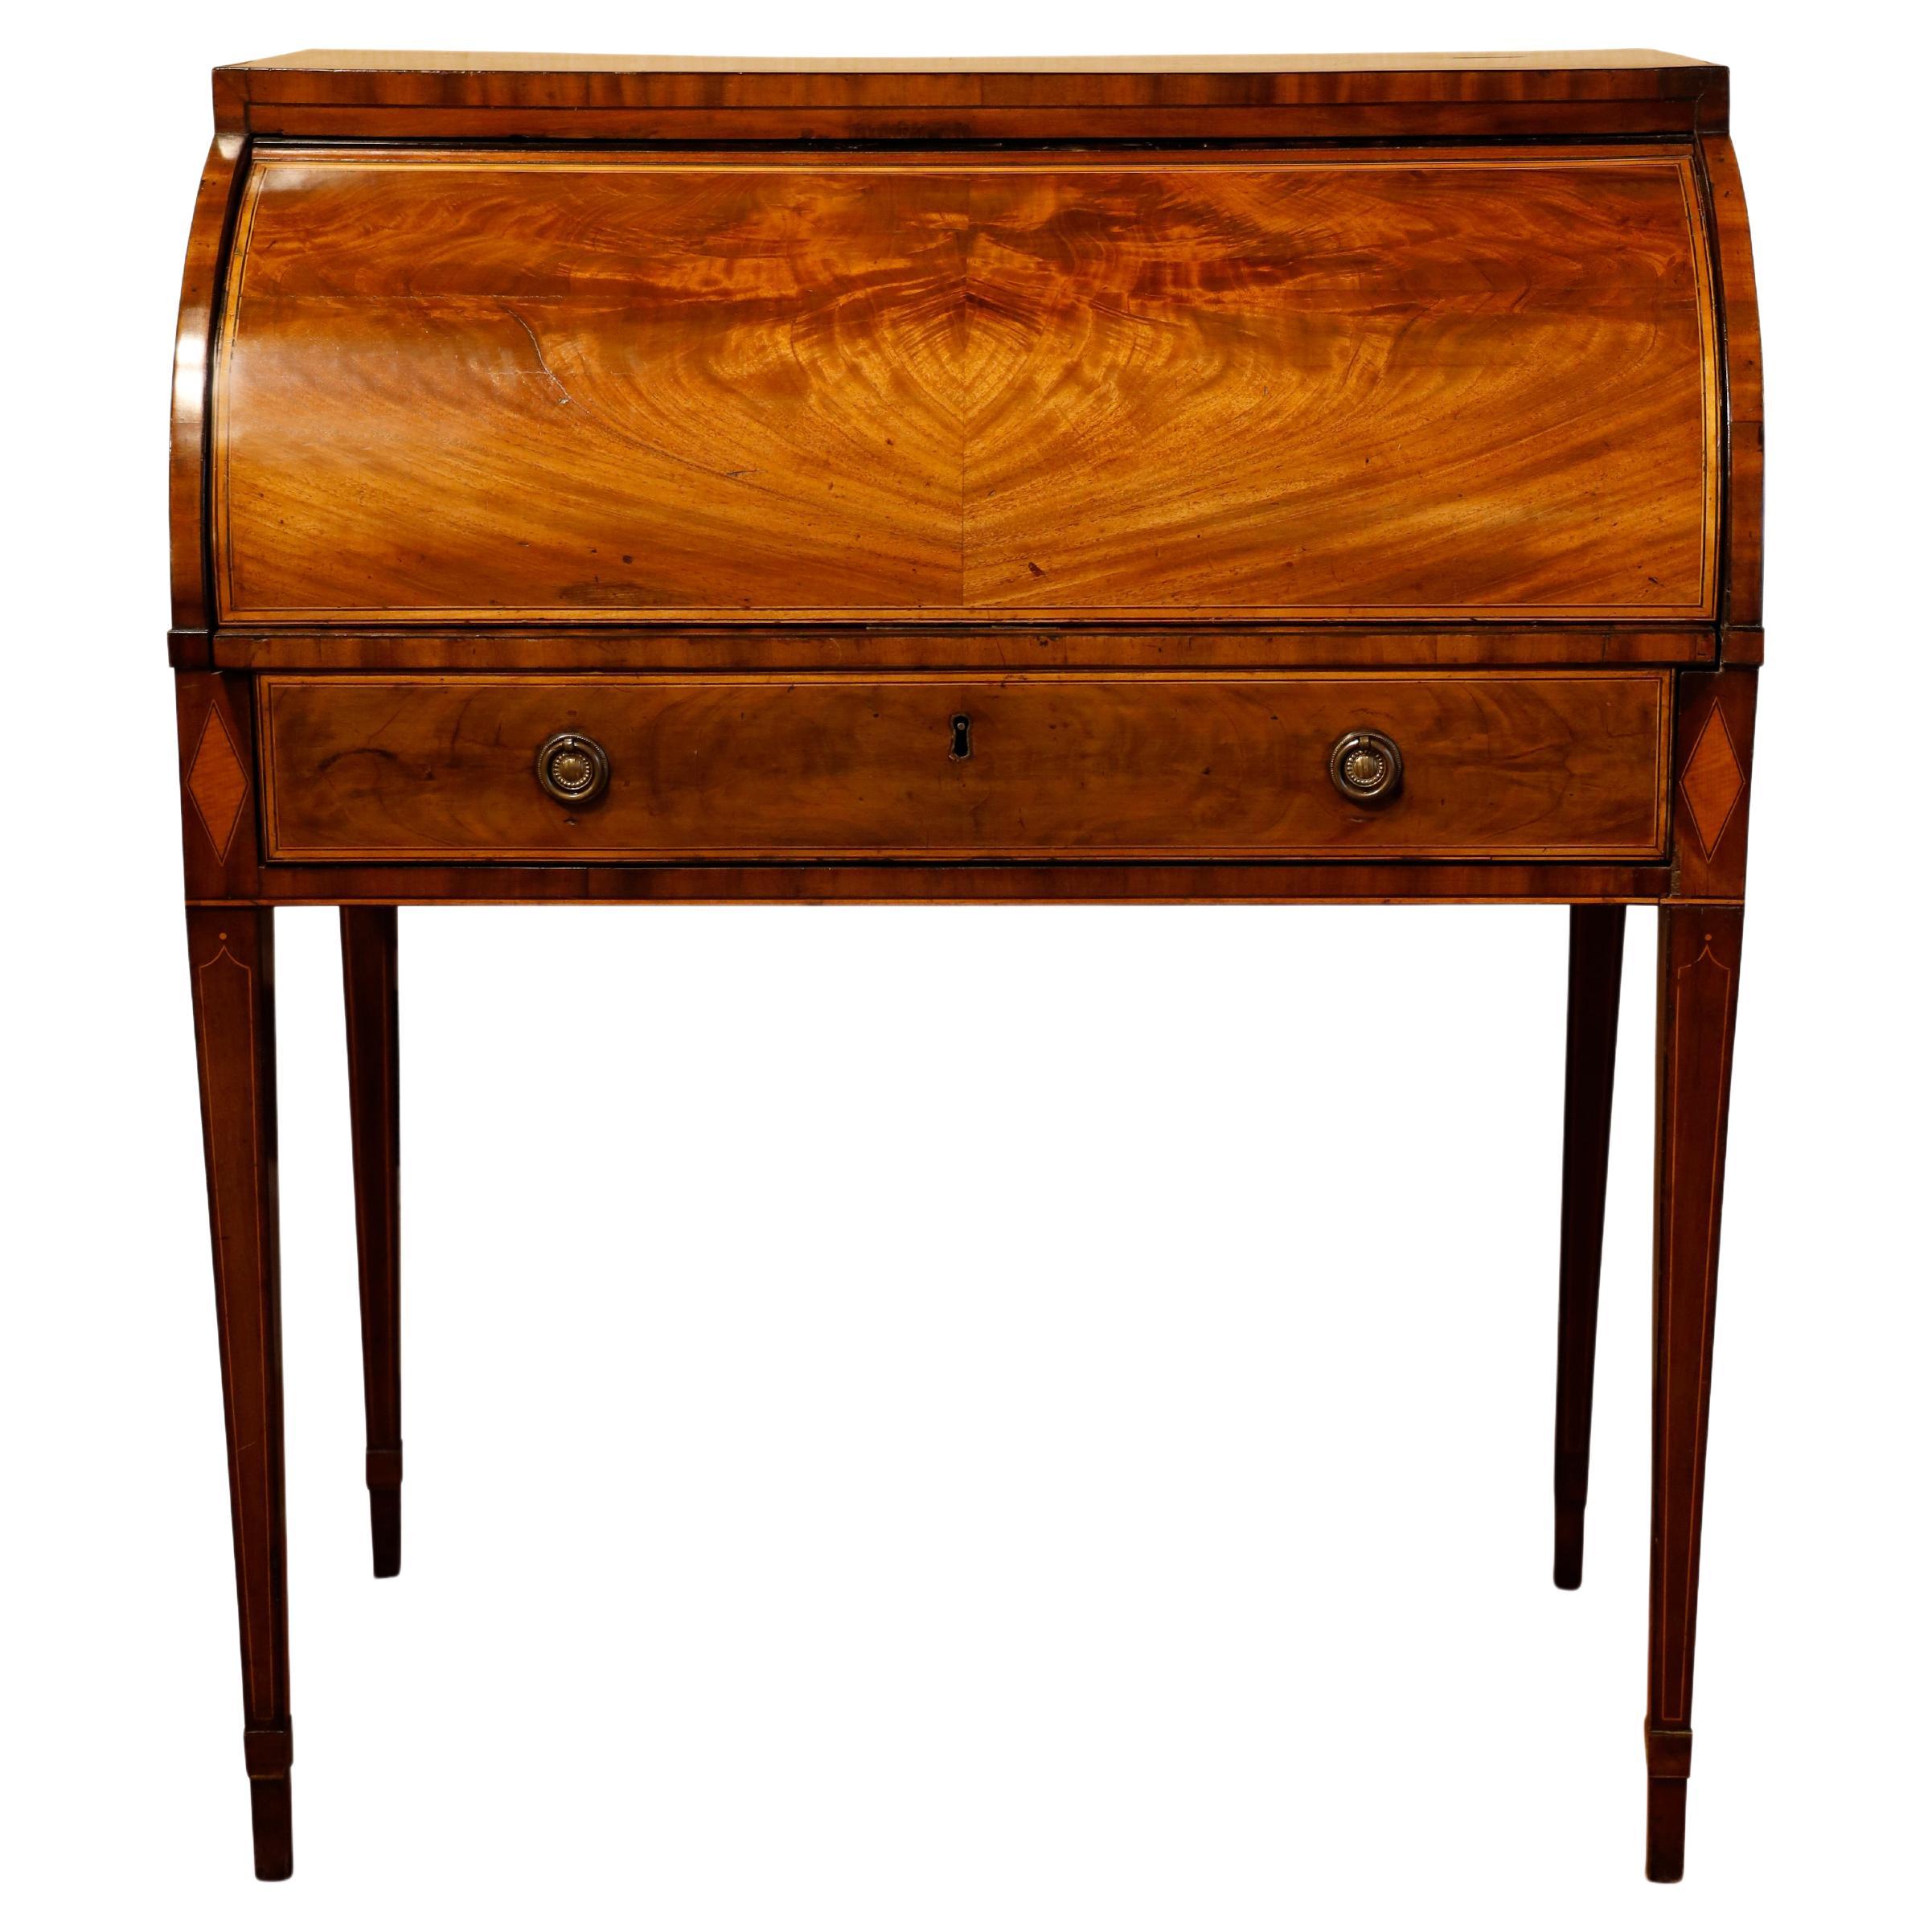 Scottish, George III Mahogany and Sycamore Banded Cylinder Bureau For Sale